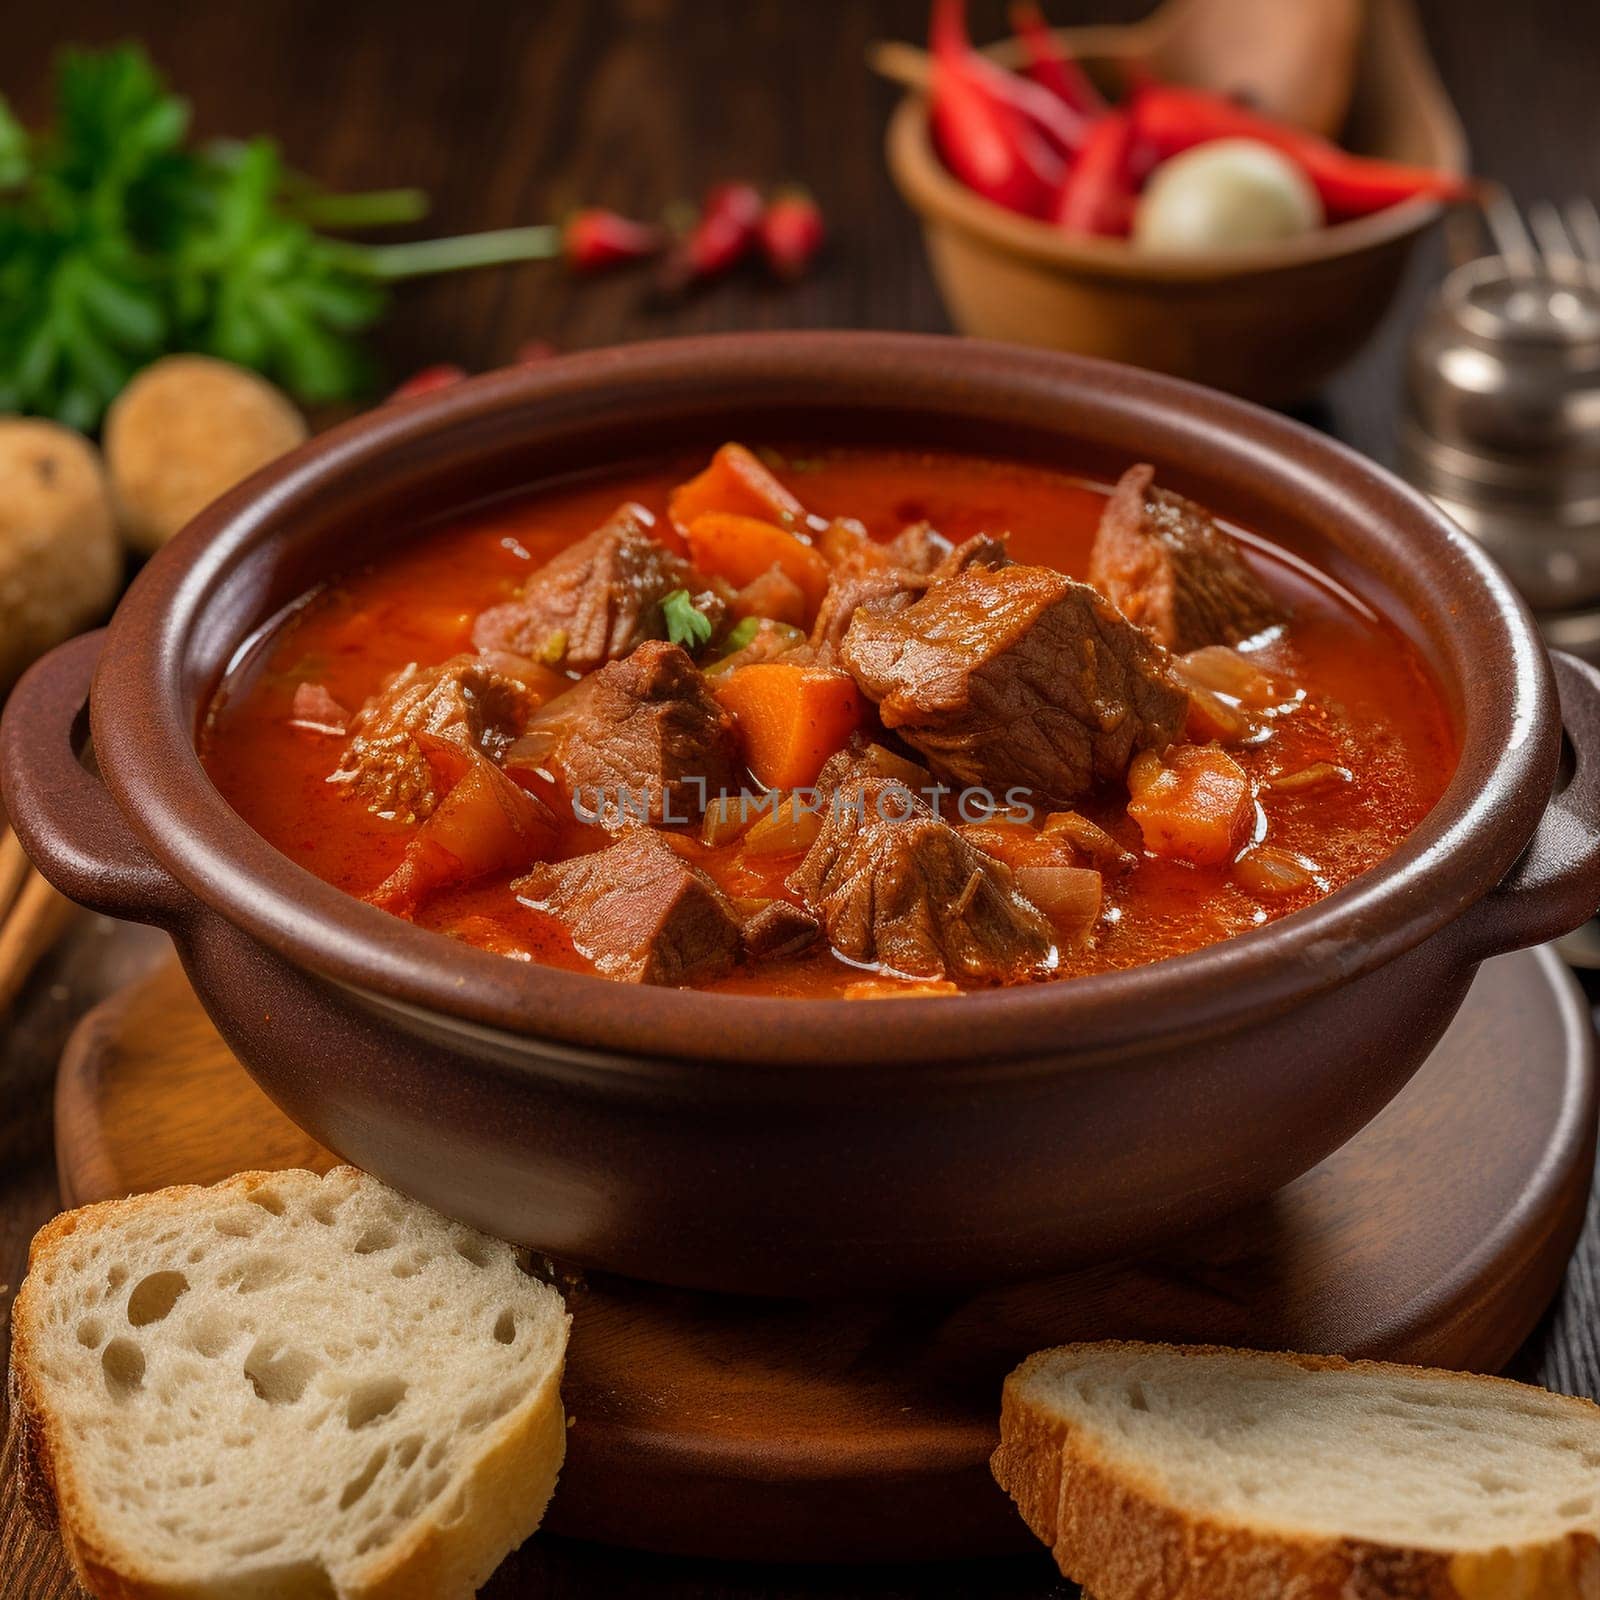 Capture the essence of comfort food with this close-up shot of Hungarian Goulash, a hearty meat and vegetable stew. The dish features tender pieces of beef or pork, slow-cooked in a spicy paprika-infused broth with potatoes, onions, and bell peppers. Served with a side of fresh bread for dipping, this dish is perfect for a cozy night in. The warm, diffused lighting and soft colors of the kitchen scene enhance the comforting atmosphere.